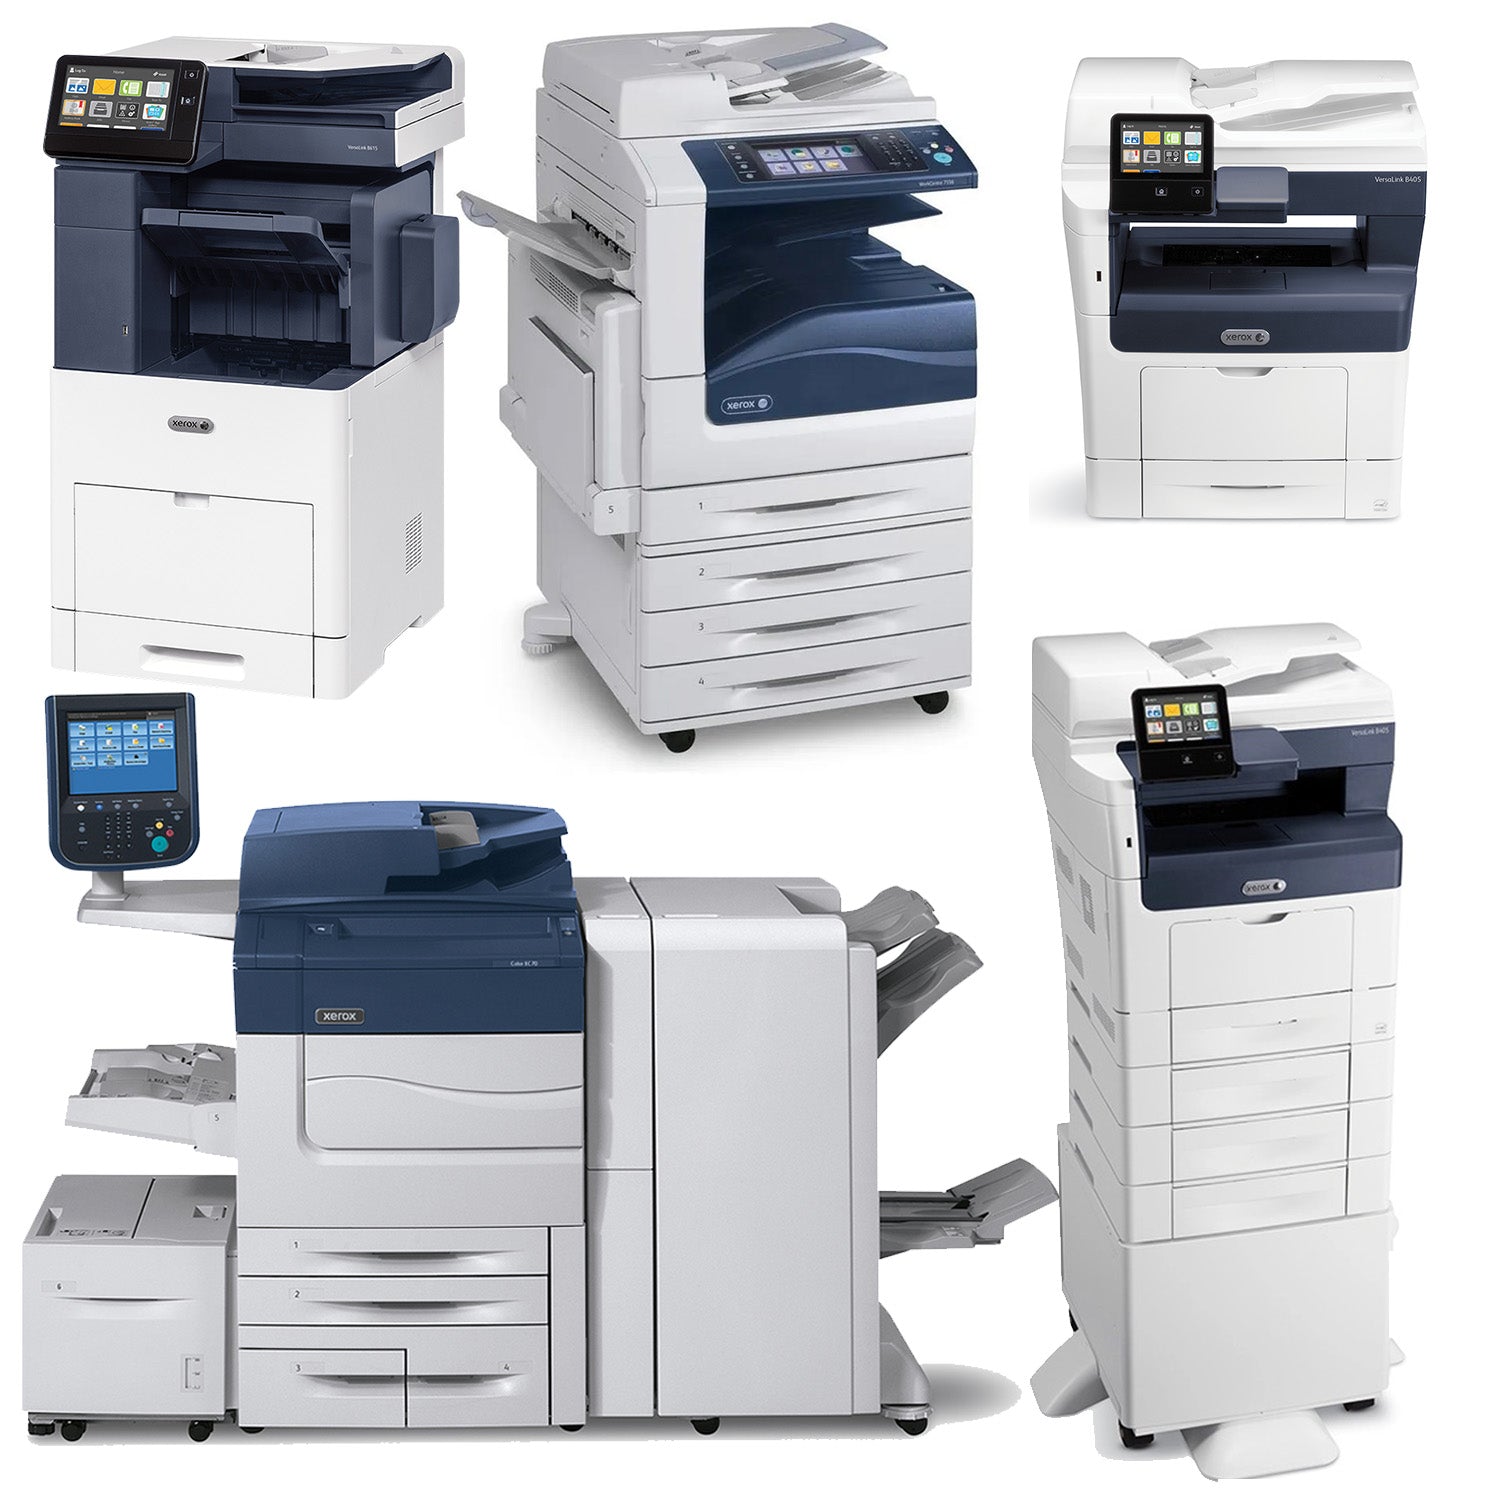 How To Order Supplies for Xerox Machines